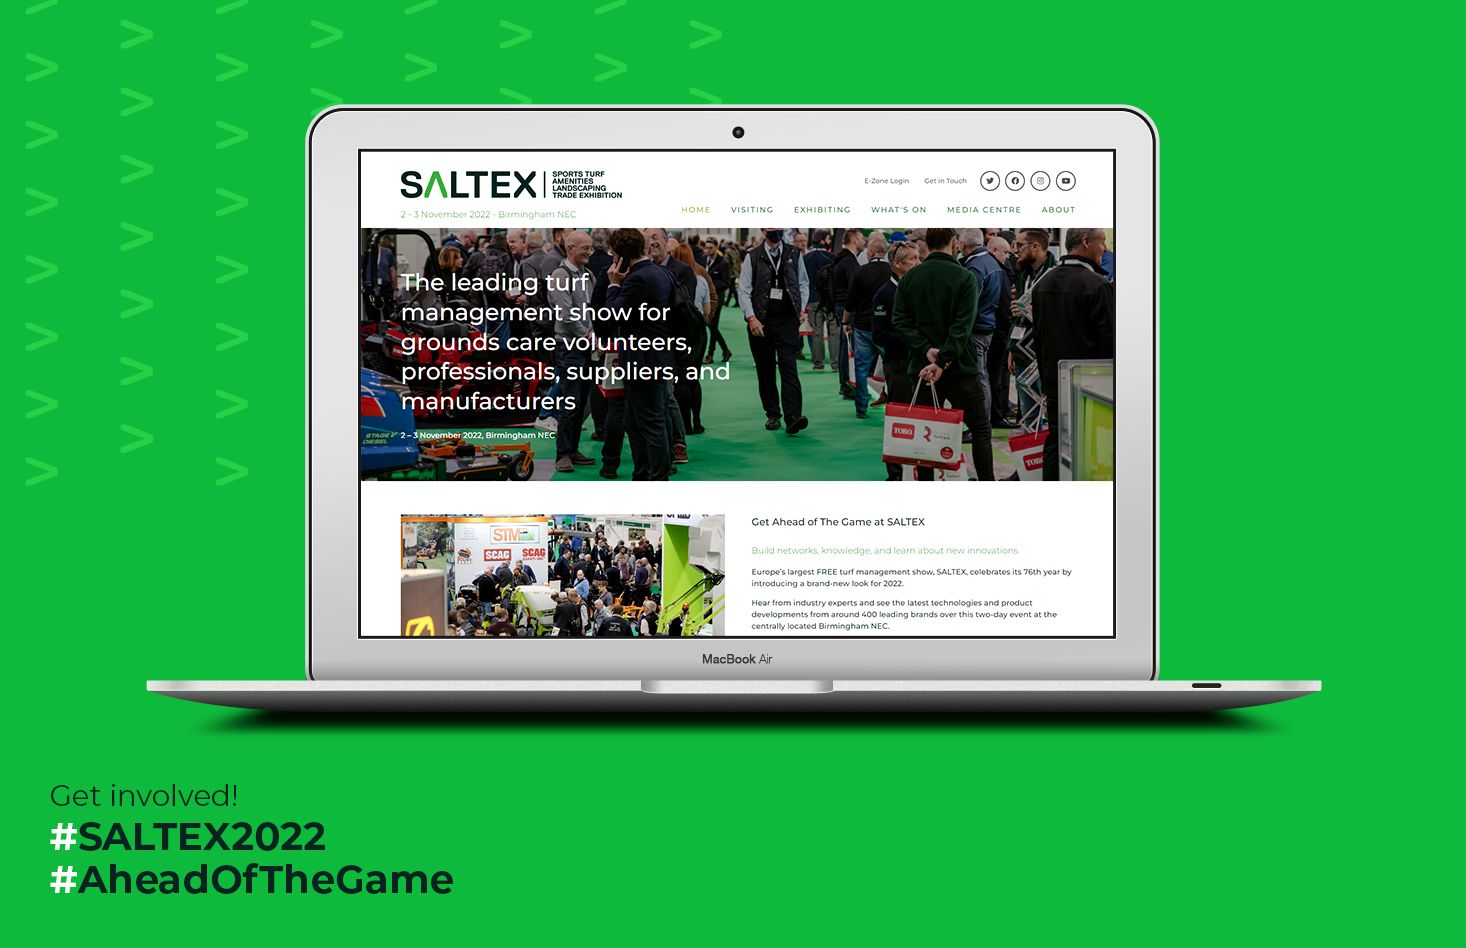 Get Ahead of the Game at SALTEX